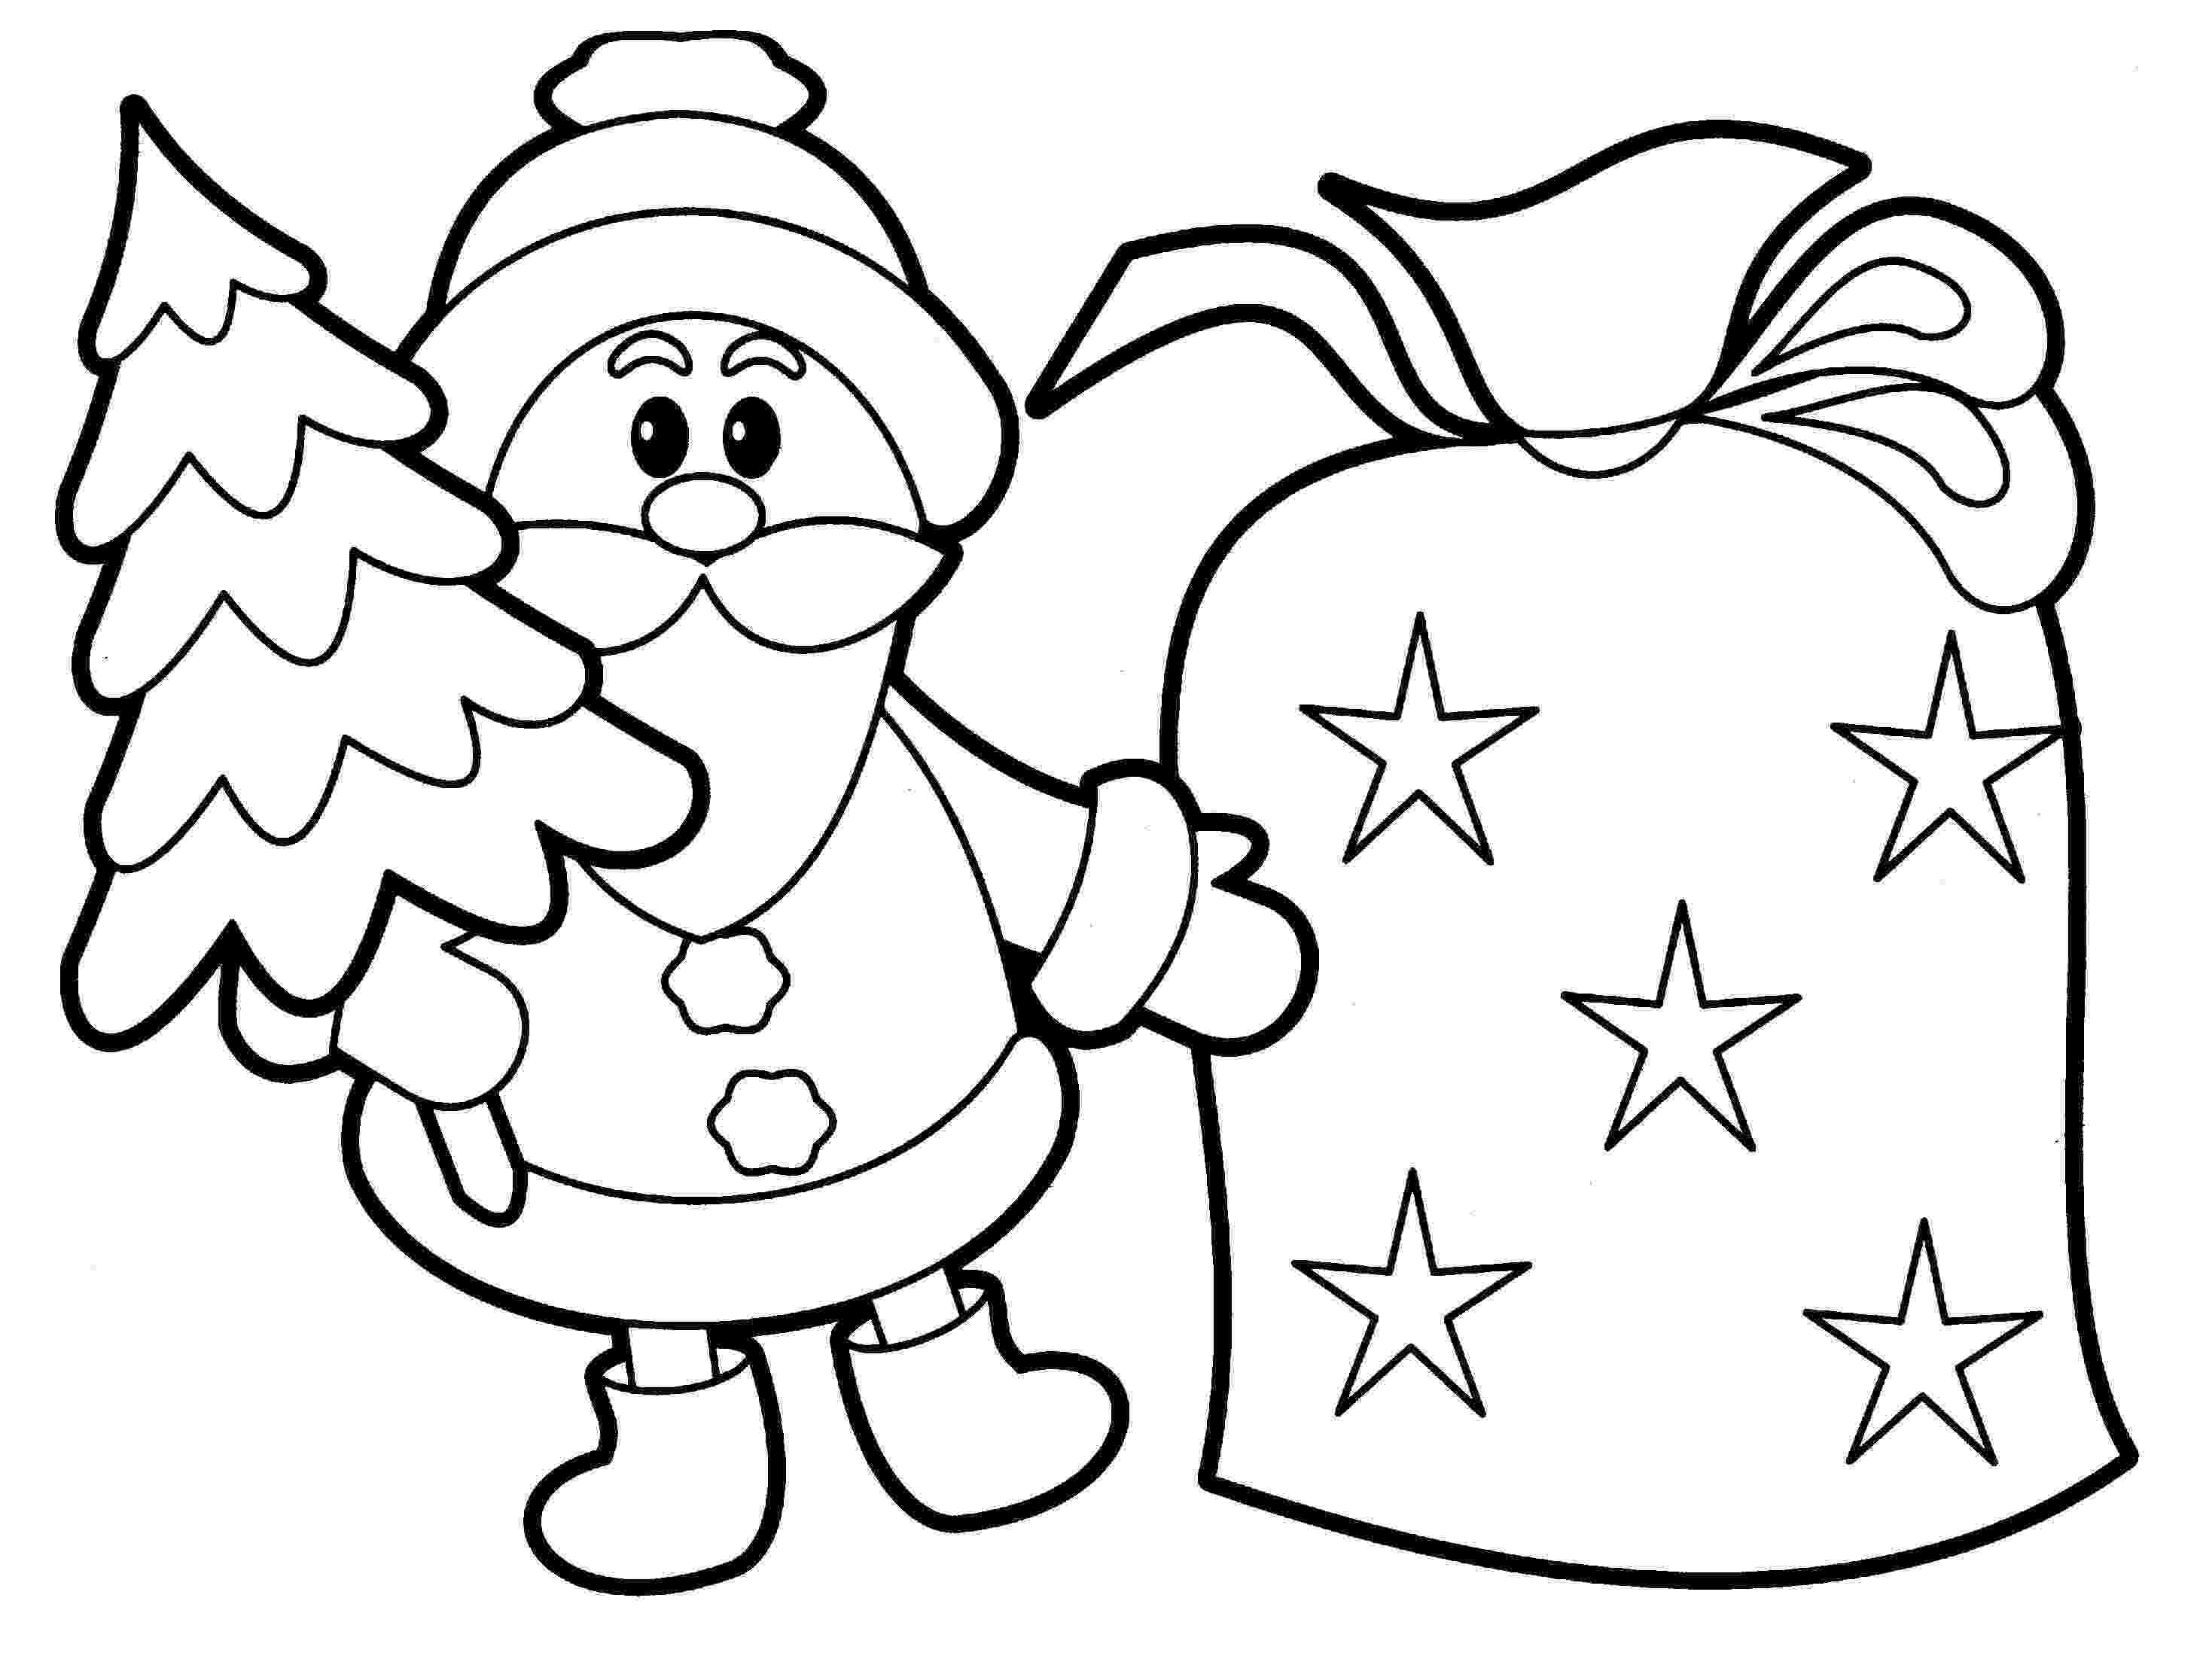 christmas coloring pages to print free free christmas coloring pages printable wallpapers9 print coloring christmas pages free to 